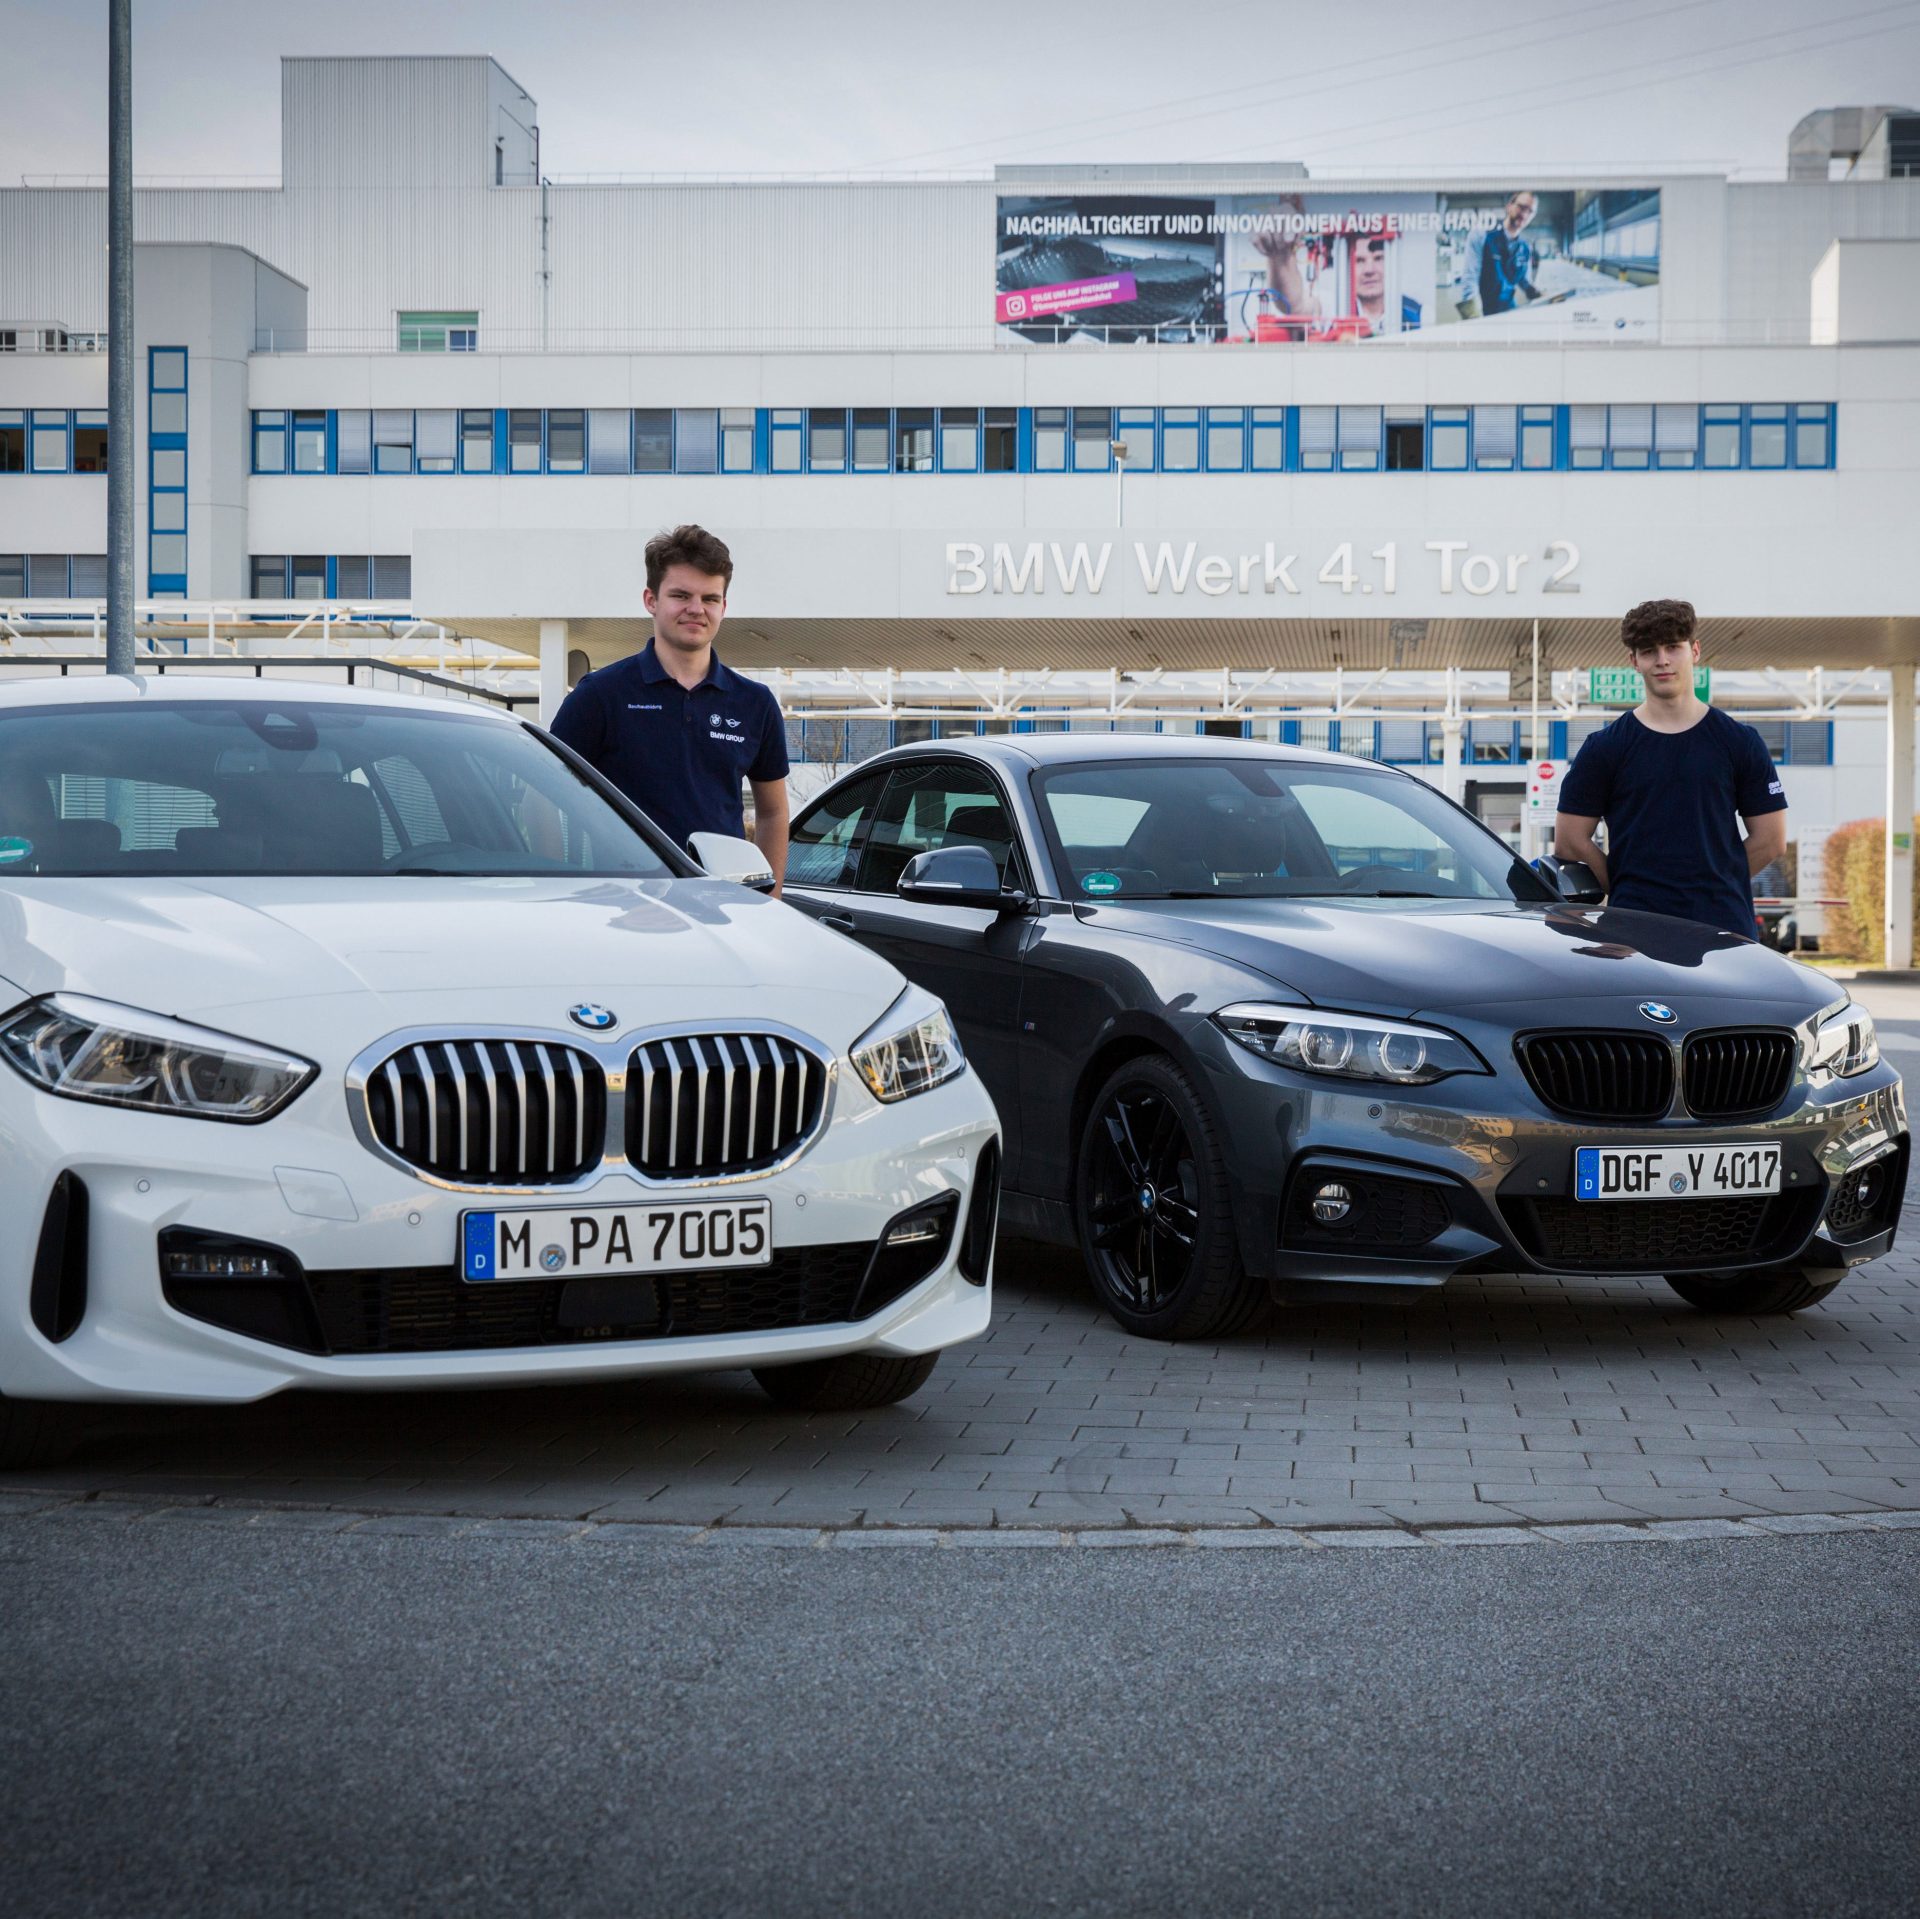 The image shows two apprentices standing next to their cars.